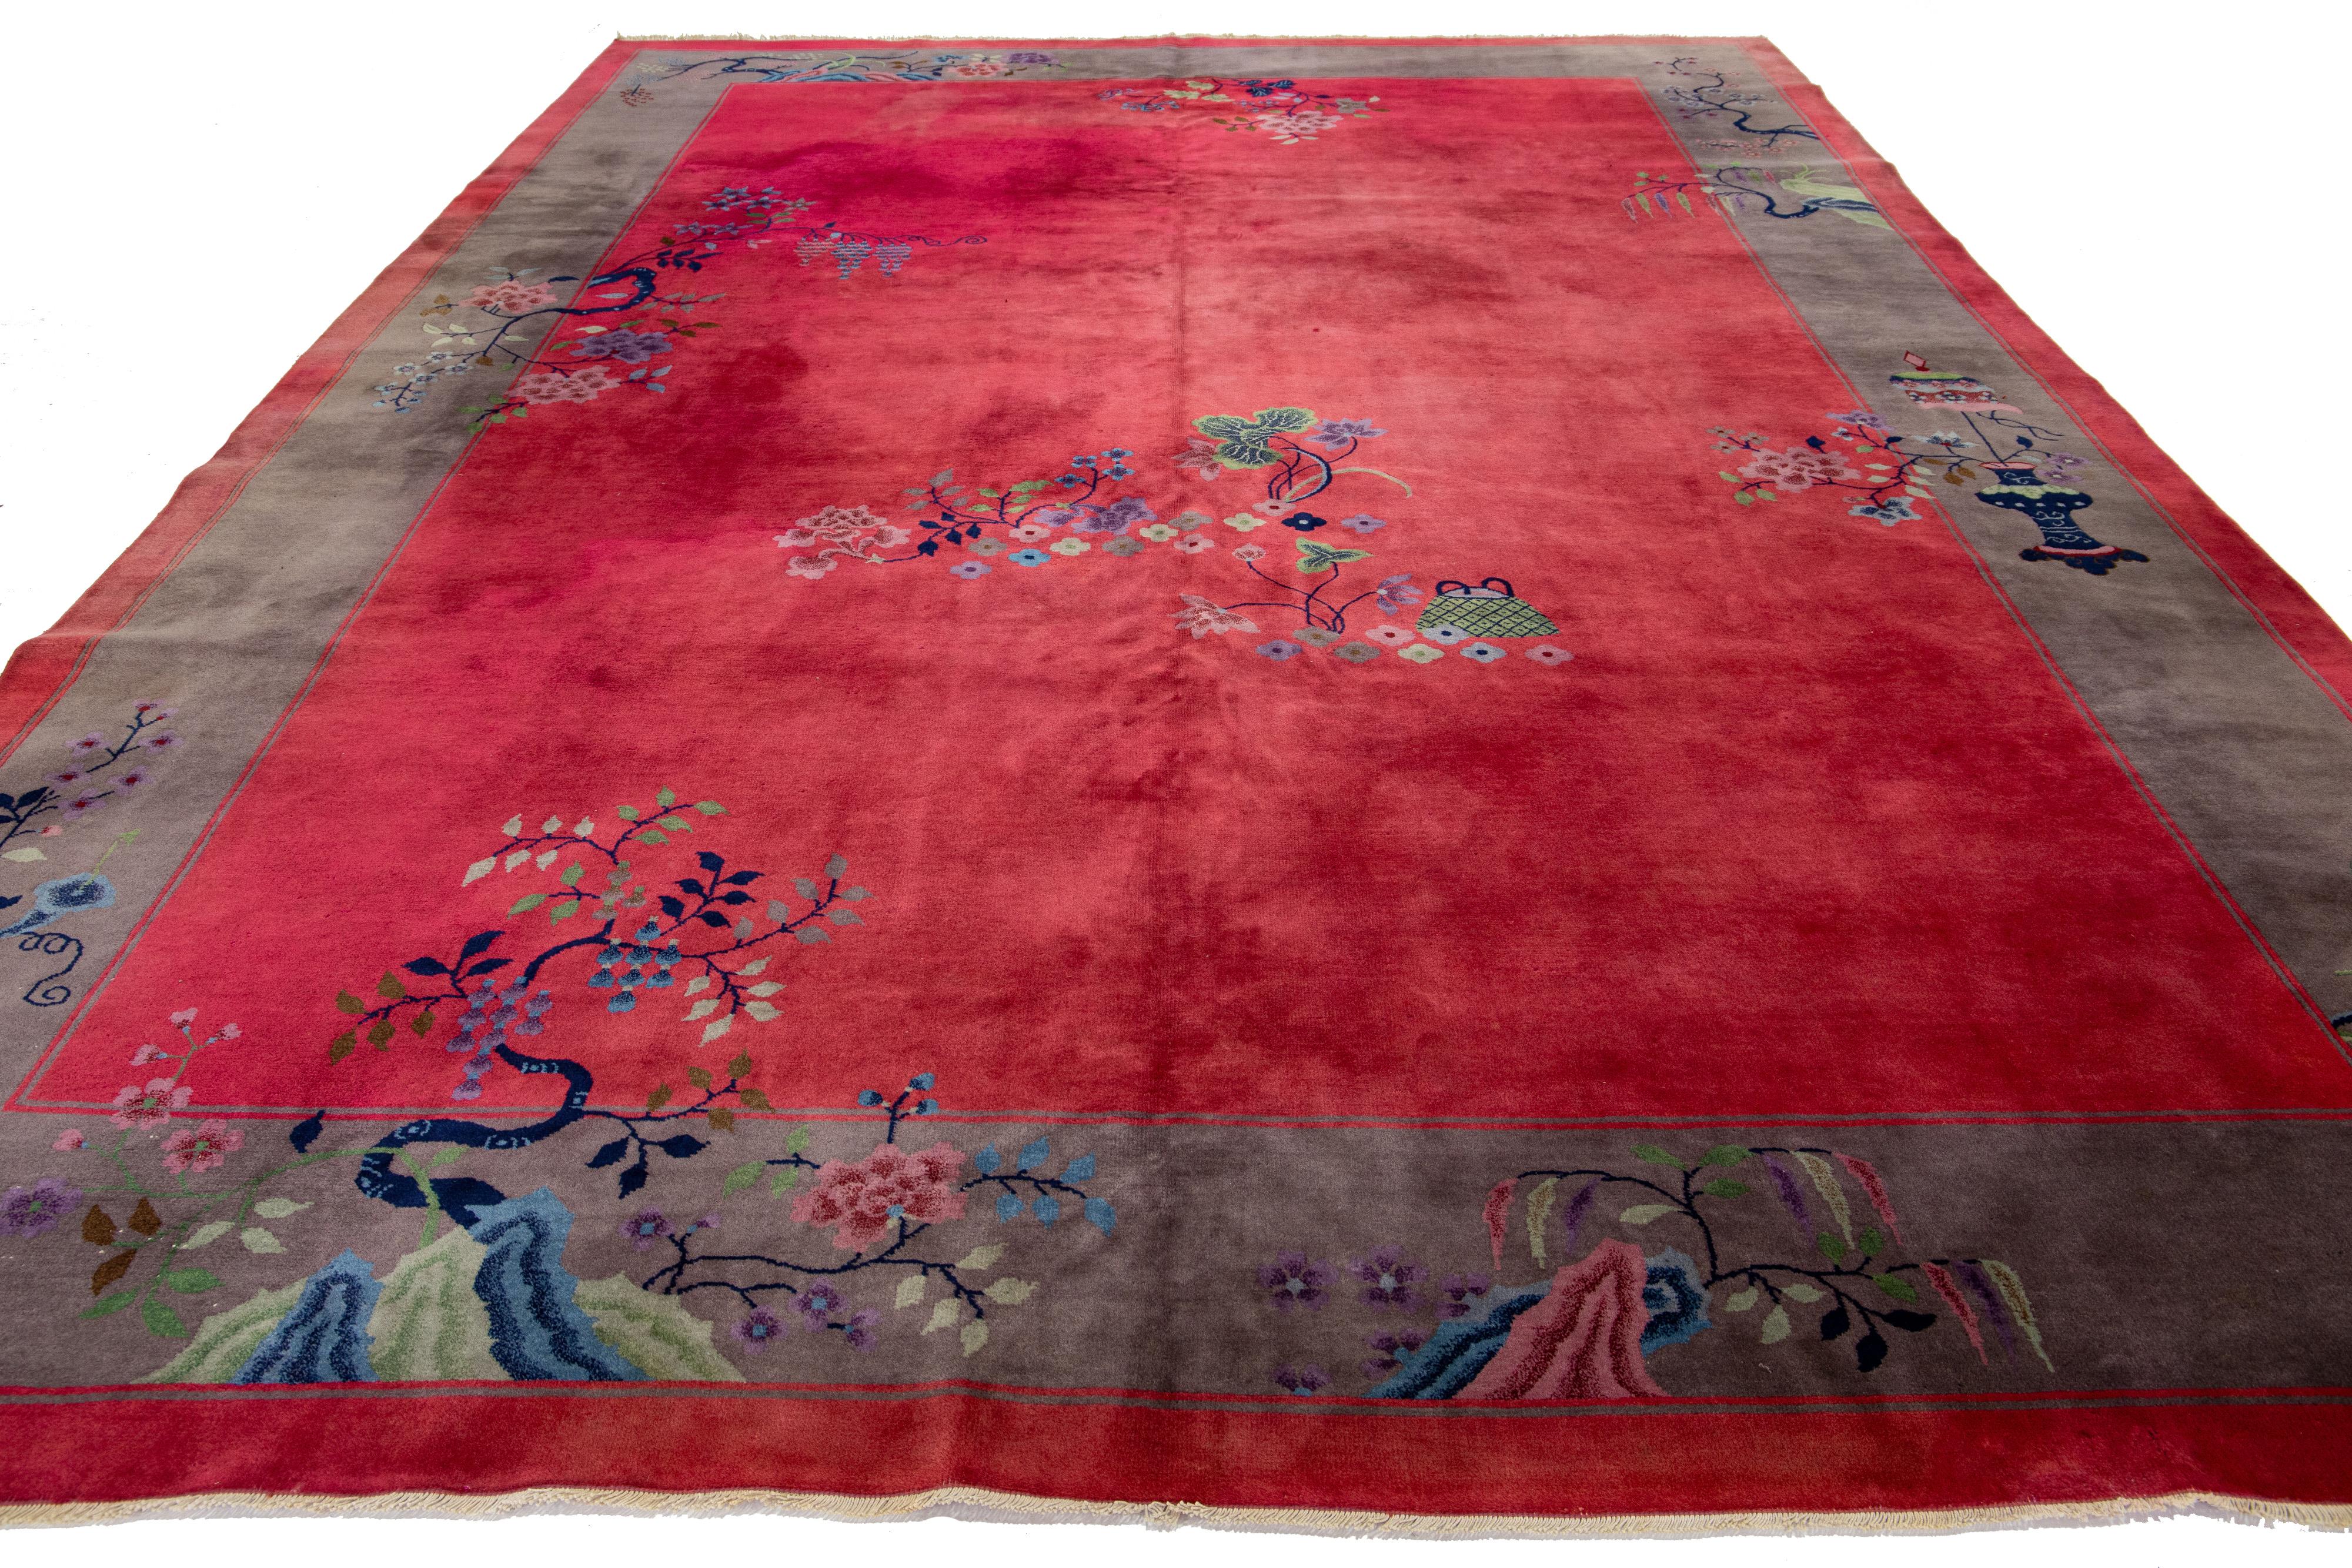 Antique Chinese Art Deco rug. Hand-knotted wool. Bold red background with Chinese floral design in multicolor hues.


This rug measures 9'8